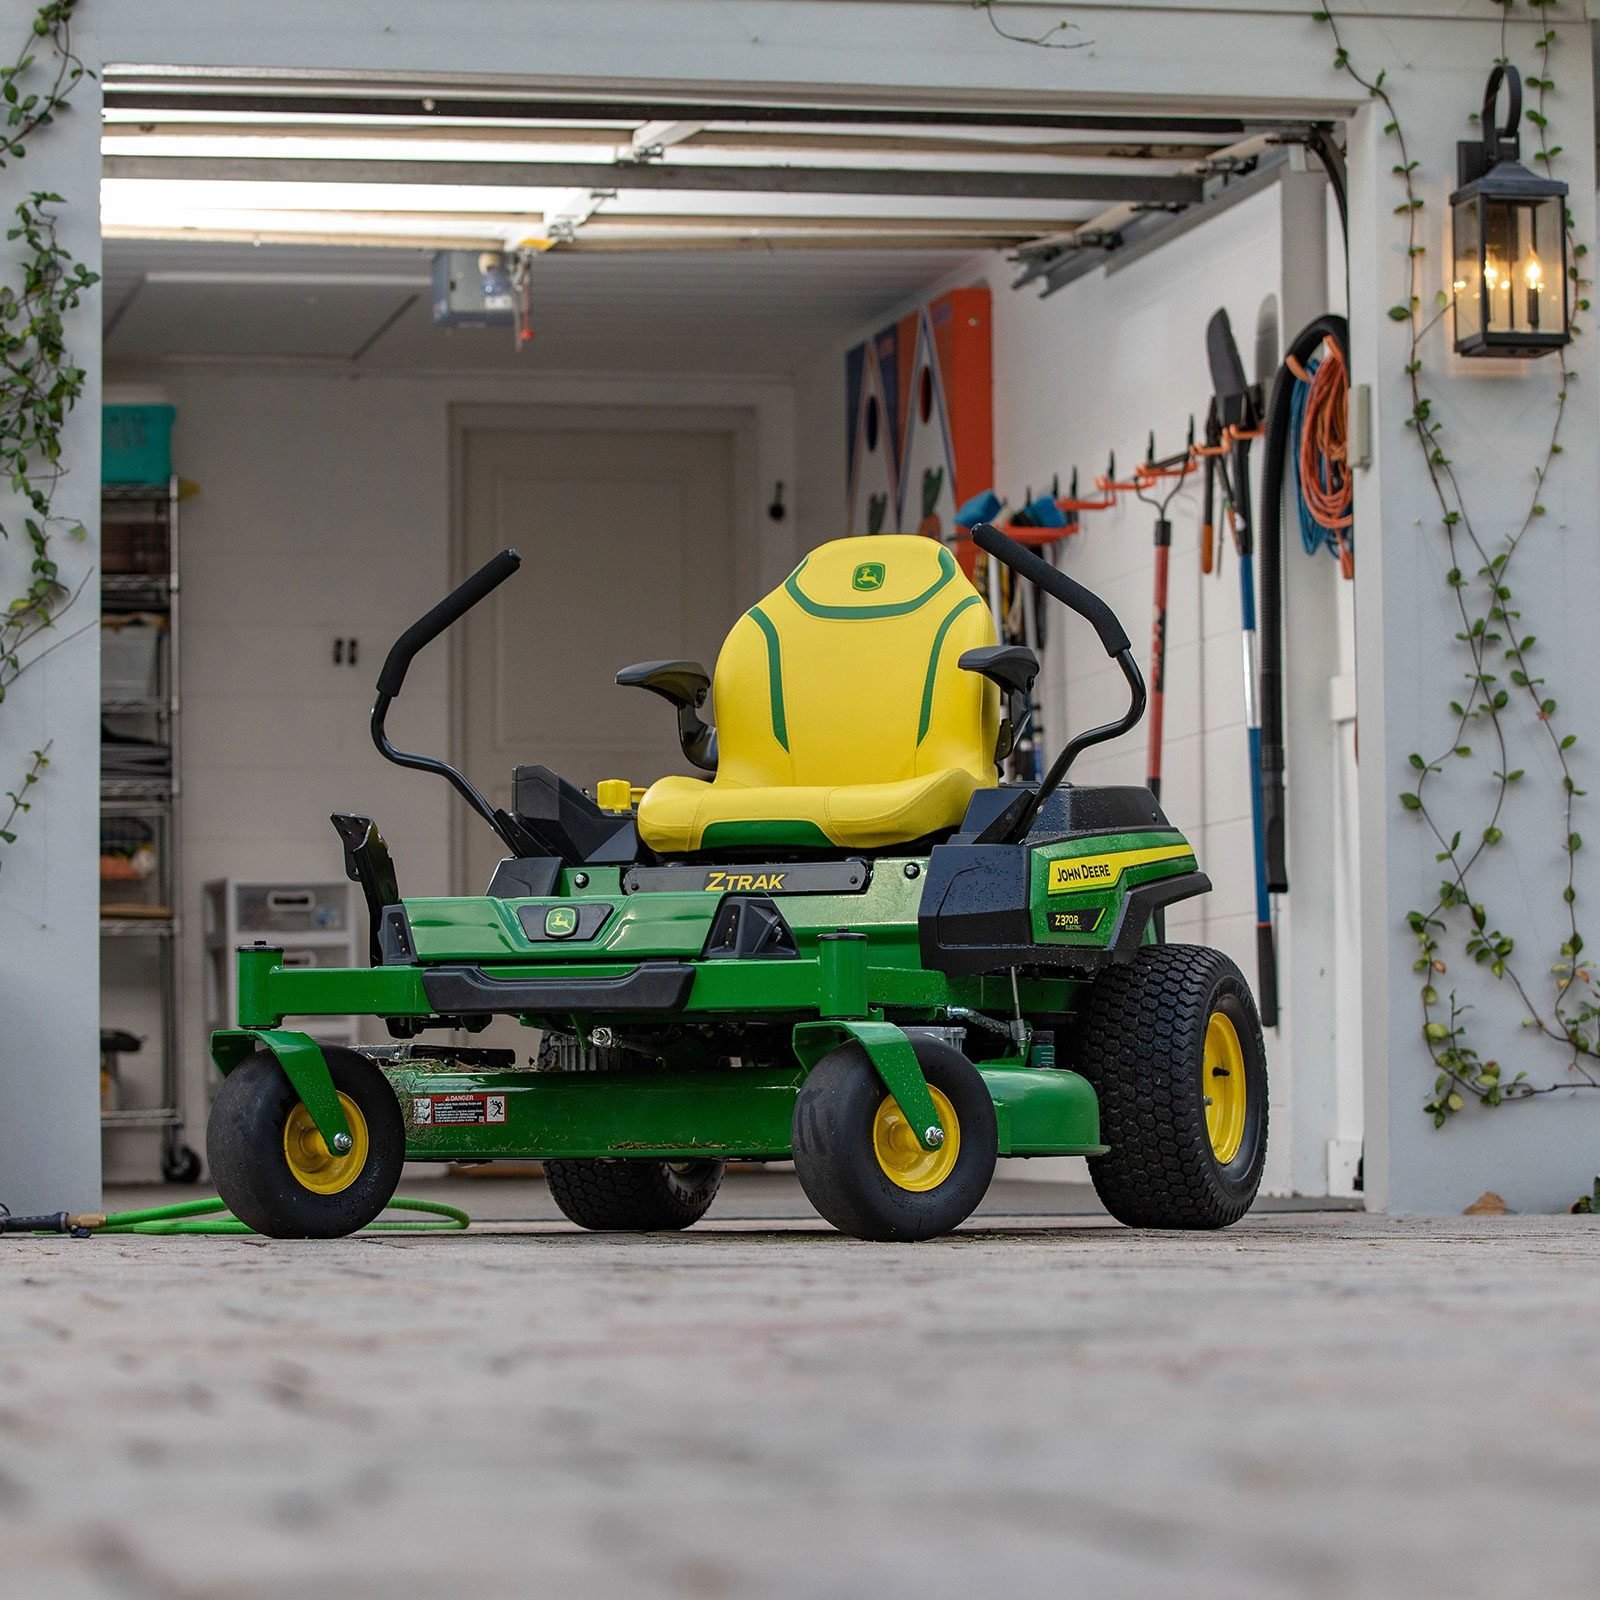 John Deere Just Debuted an All-Electric Riding Lawn Mower